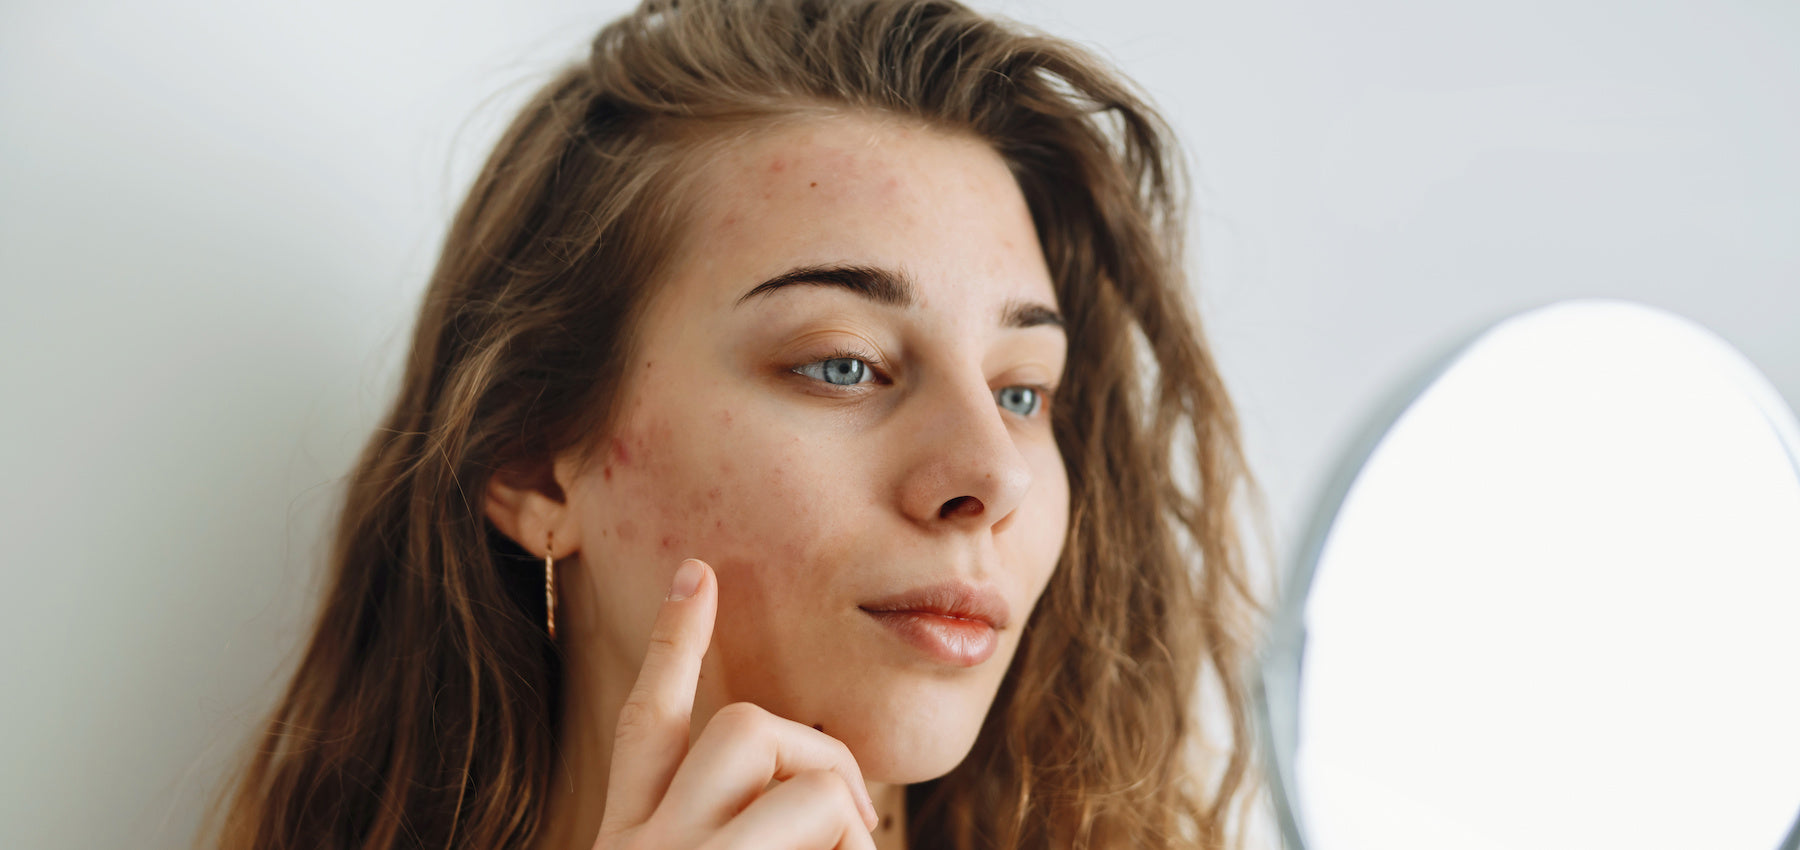 How to Prevent and Heal Acne Scars